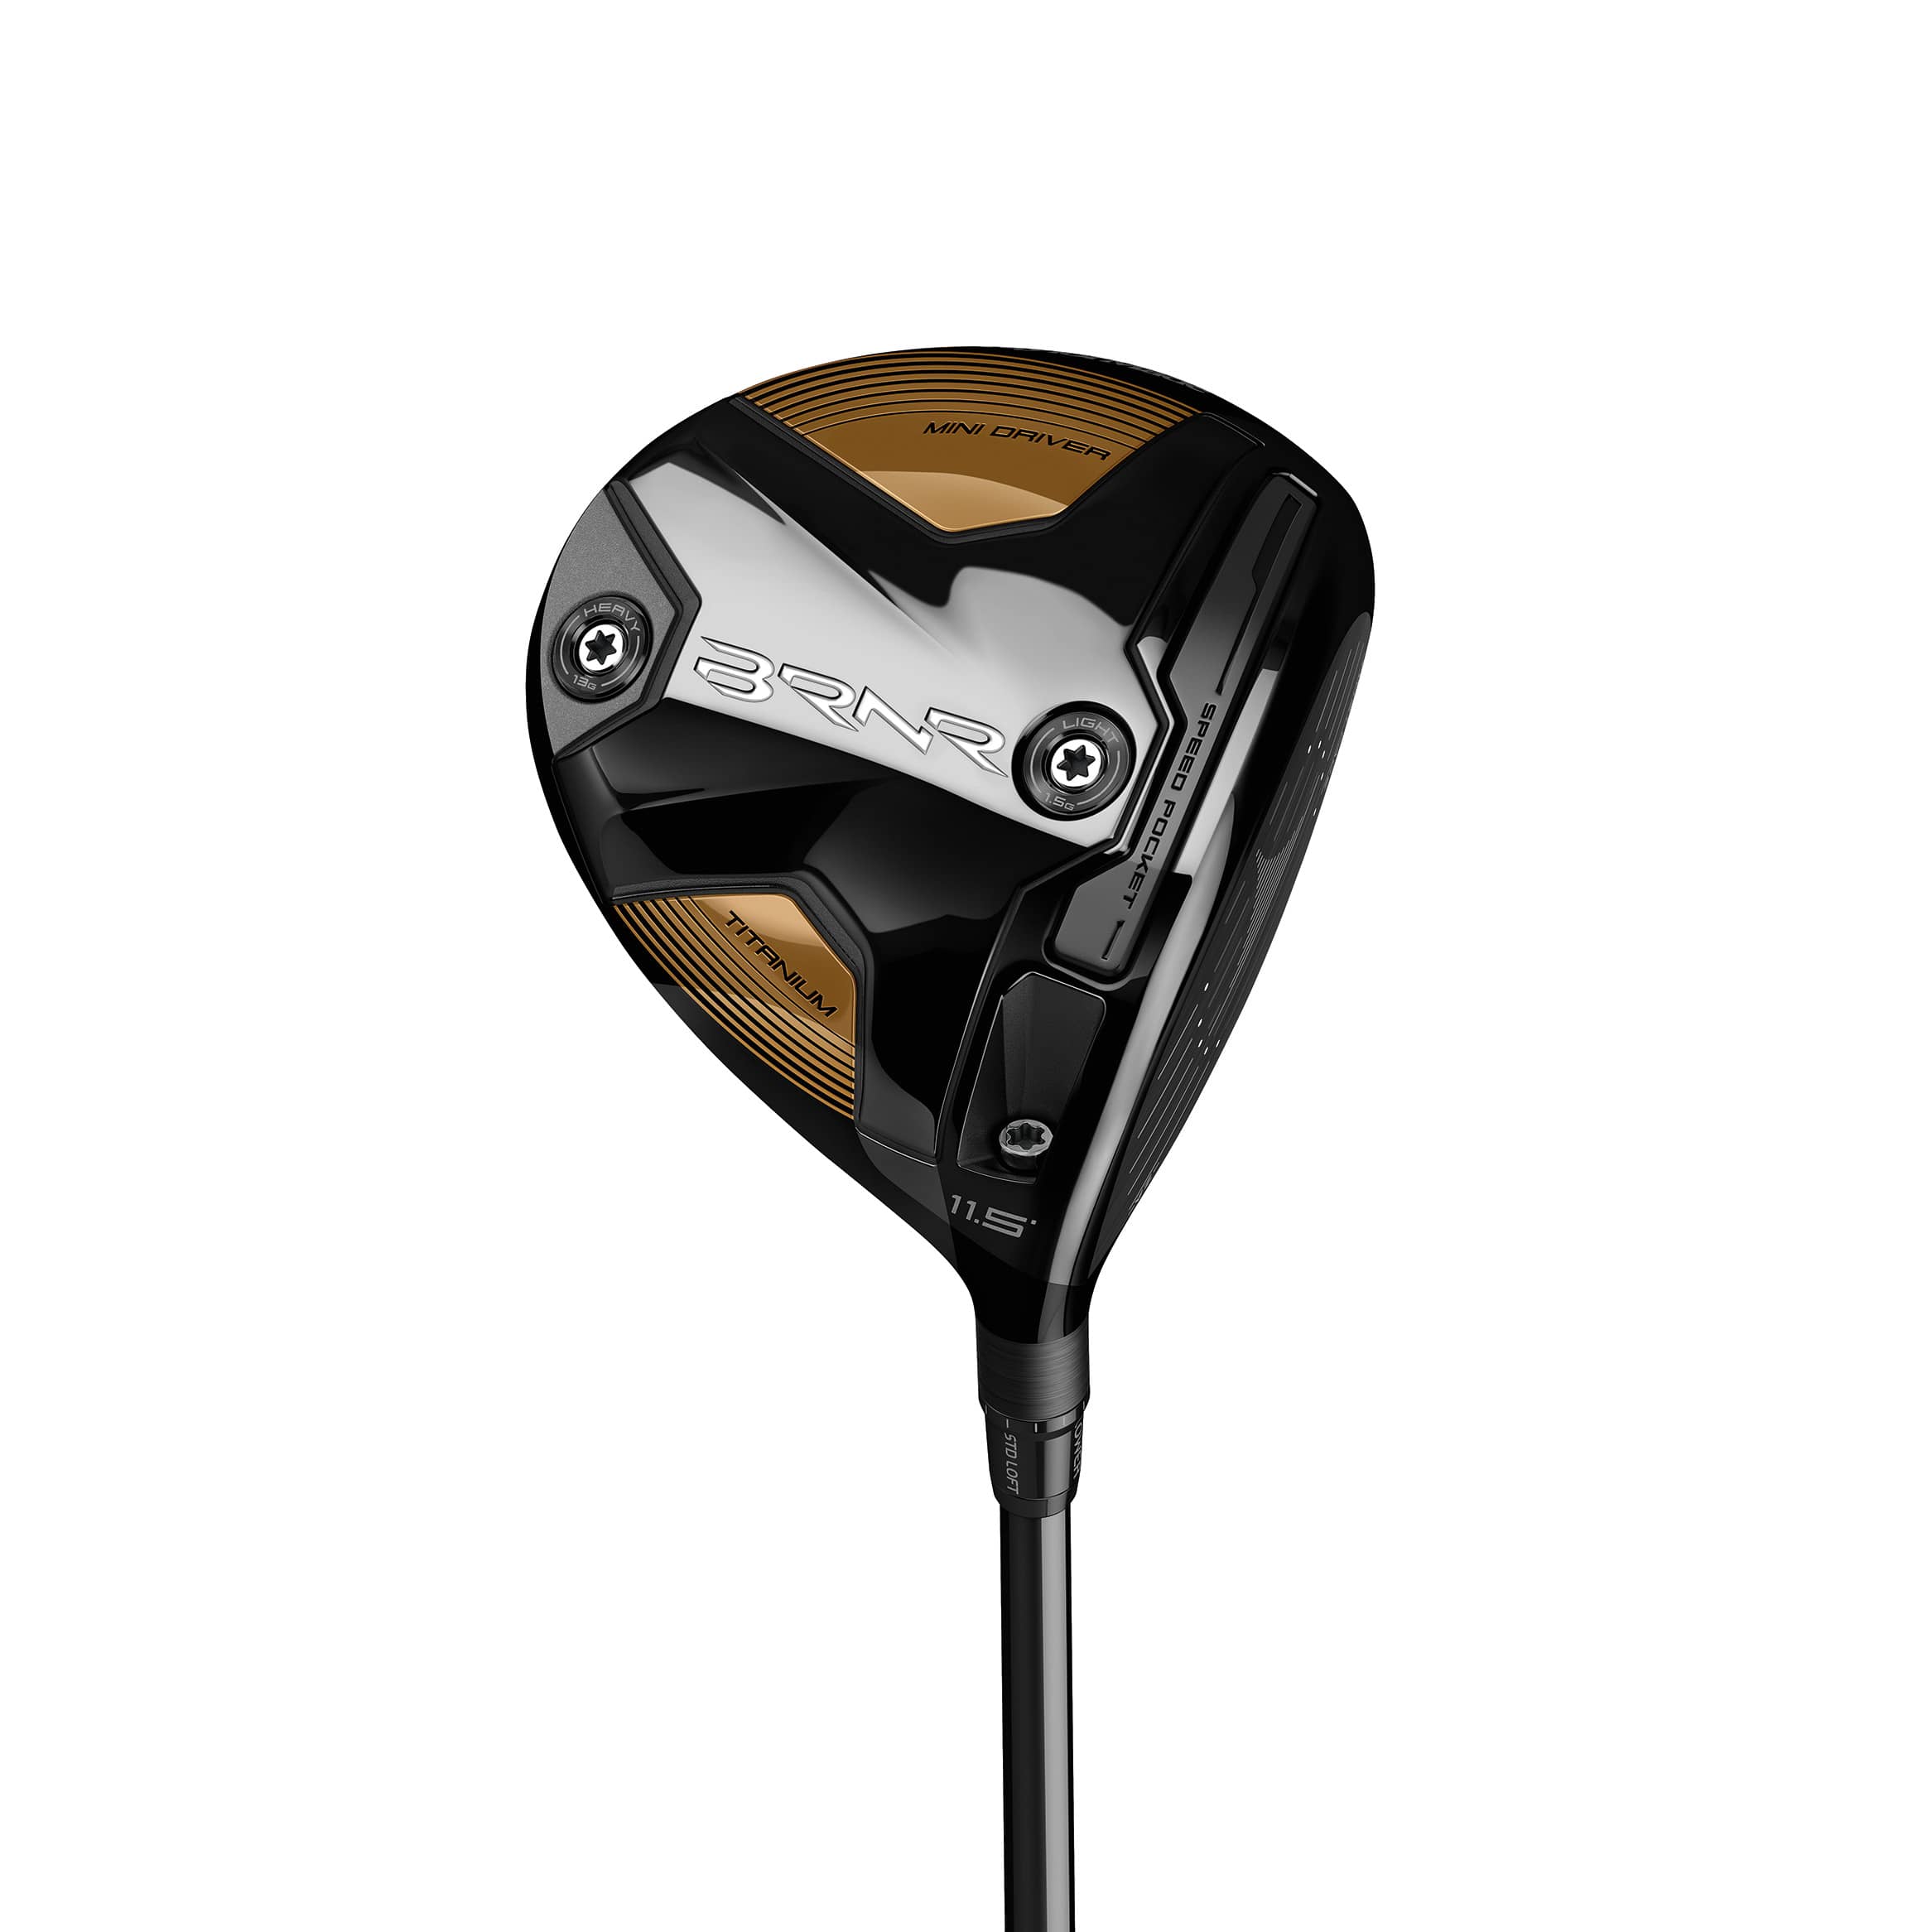 In Review TaylorMade's AllNew BRNR Mini Driver Is A Modern Take On A